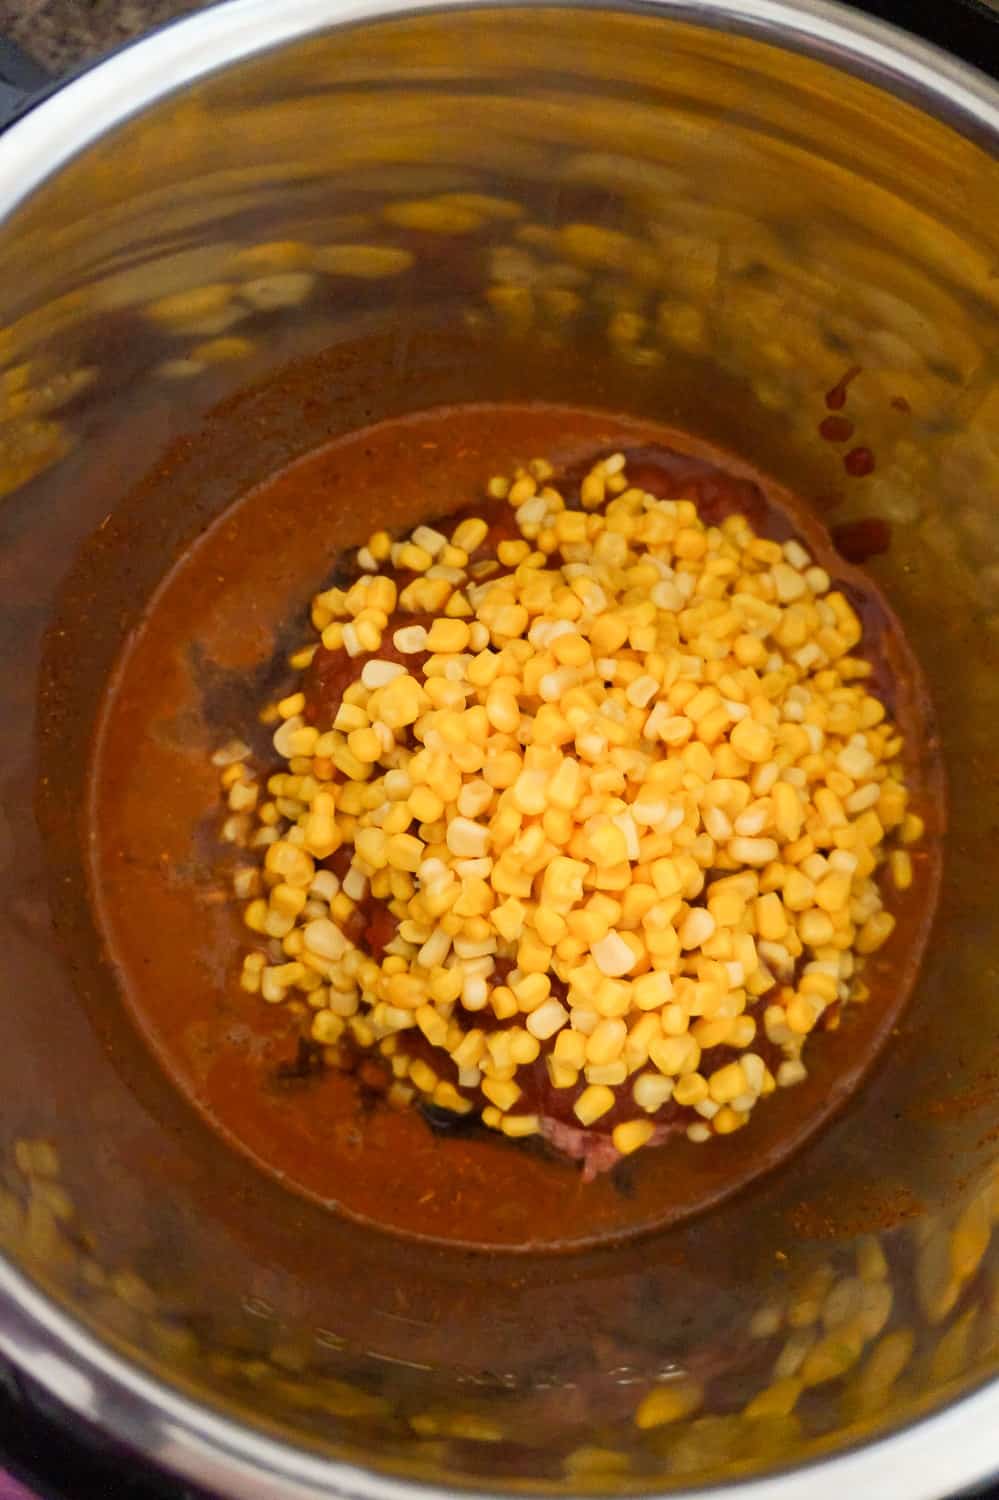 corn, chili sauce and salsa in an Instant Pot